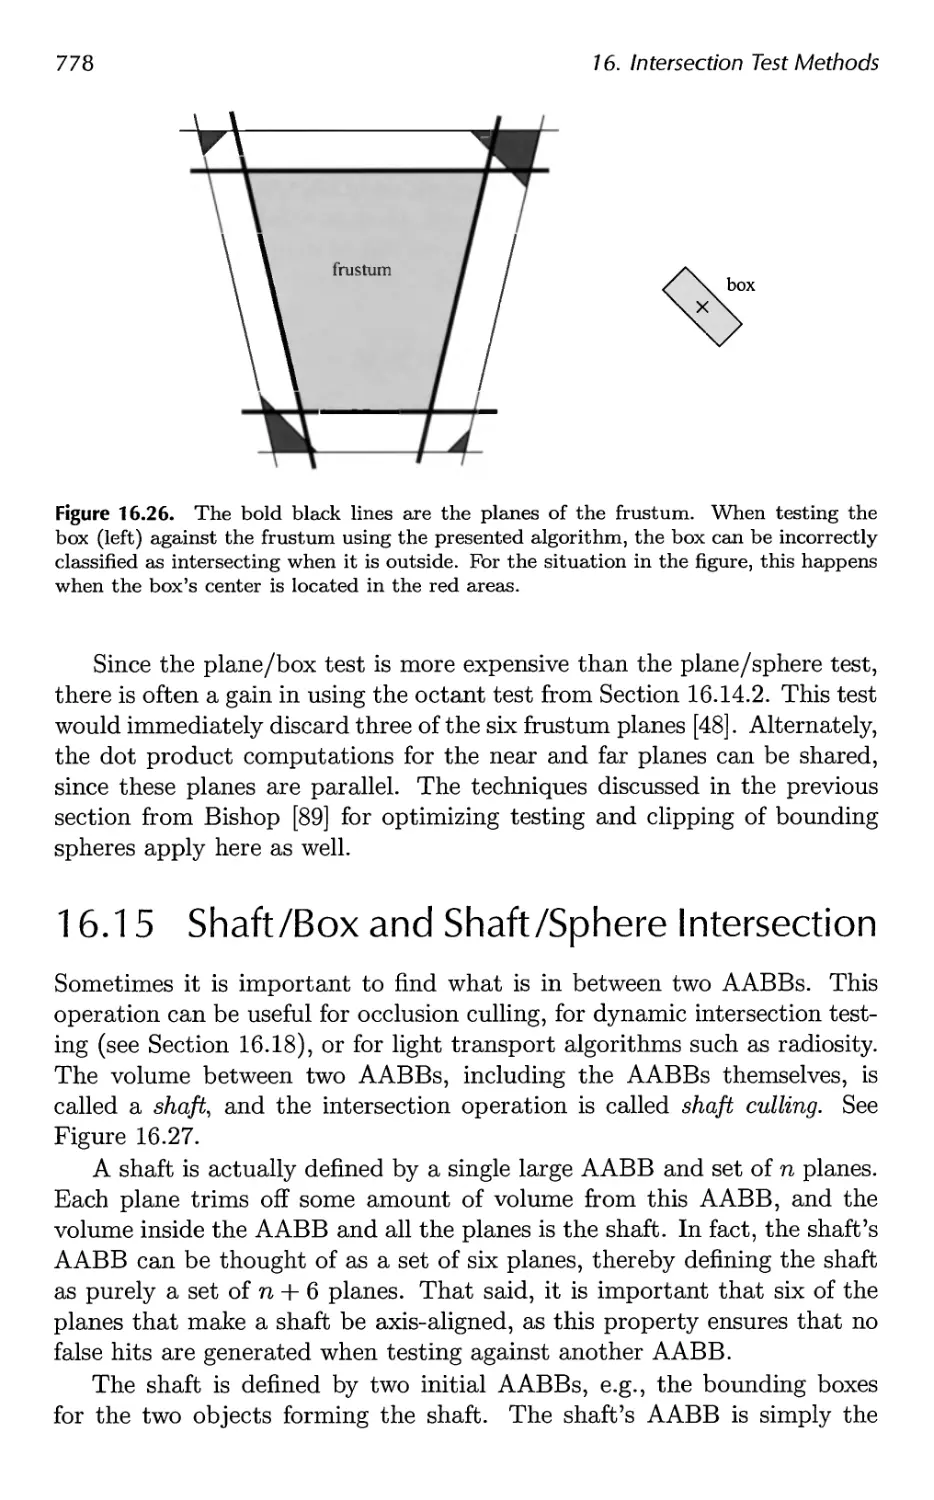 16.15 Shaft/Box and Shaft/Sphere Intersection